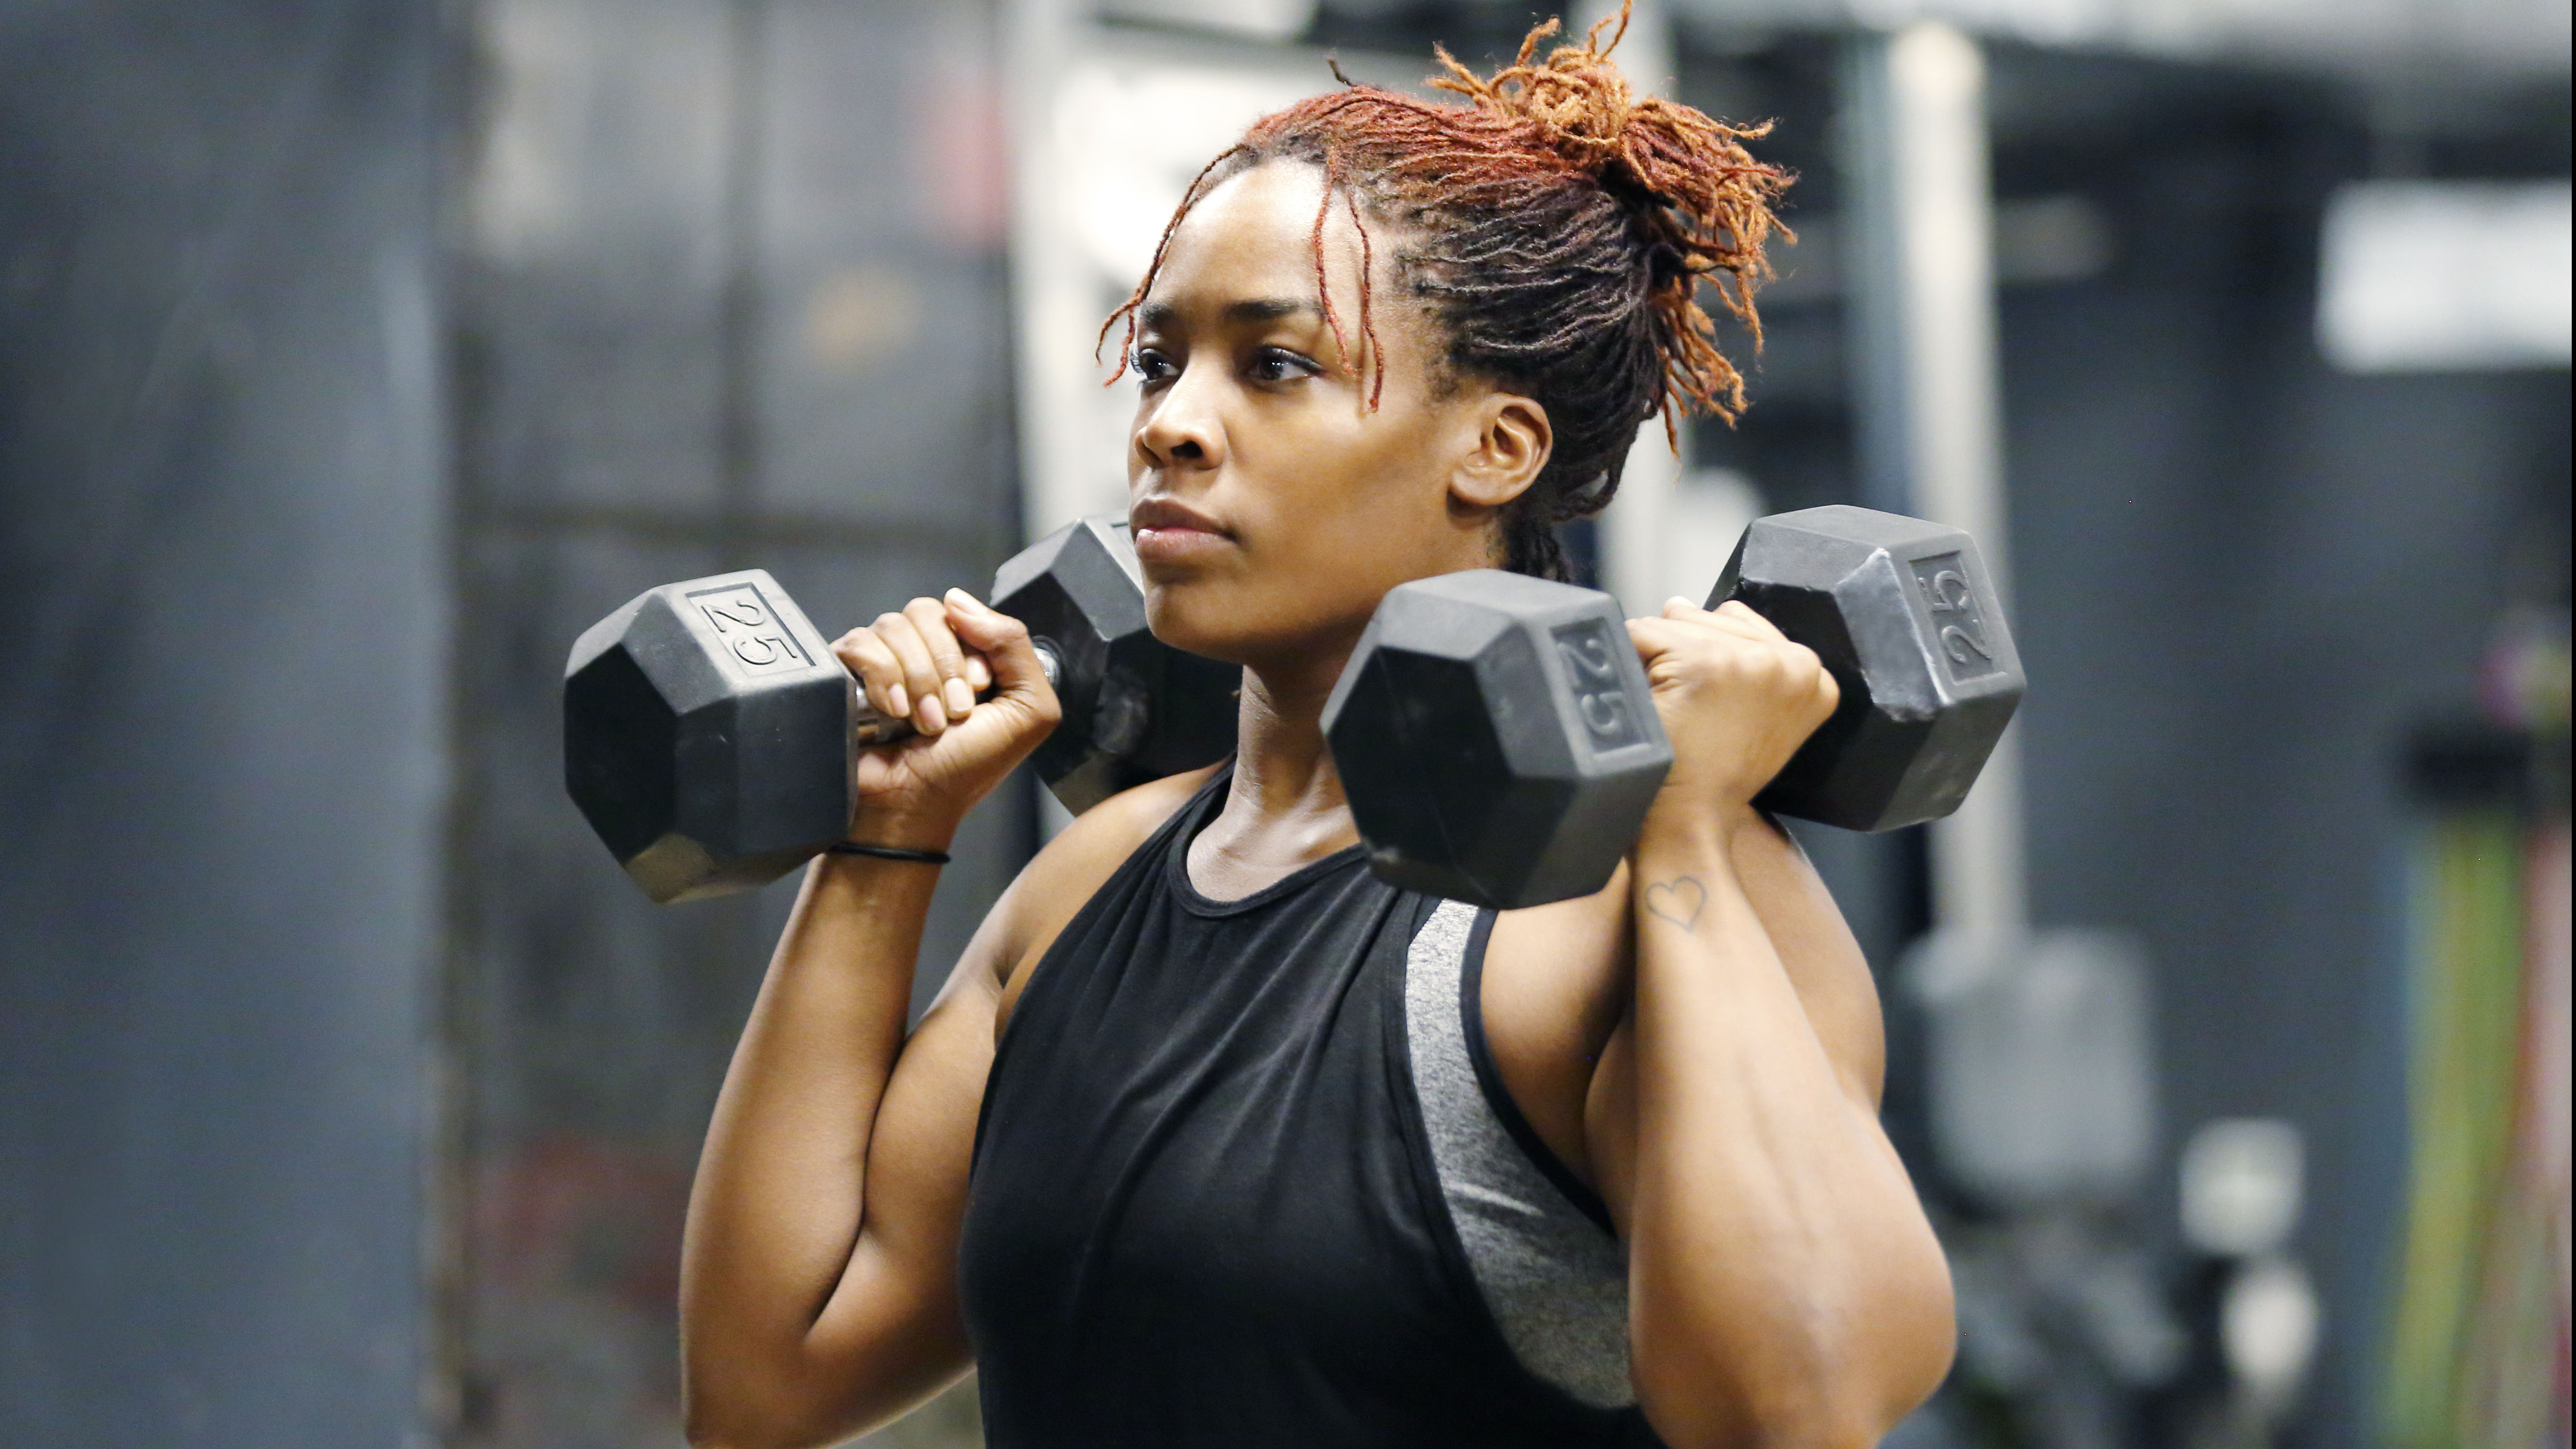 Woman lifting weights in the gym